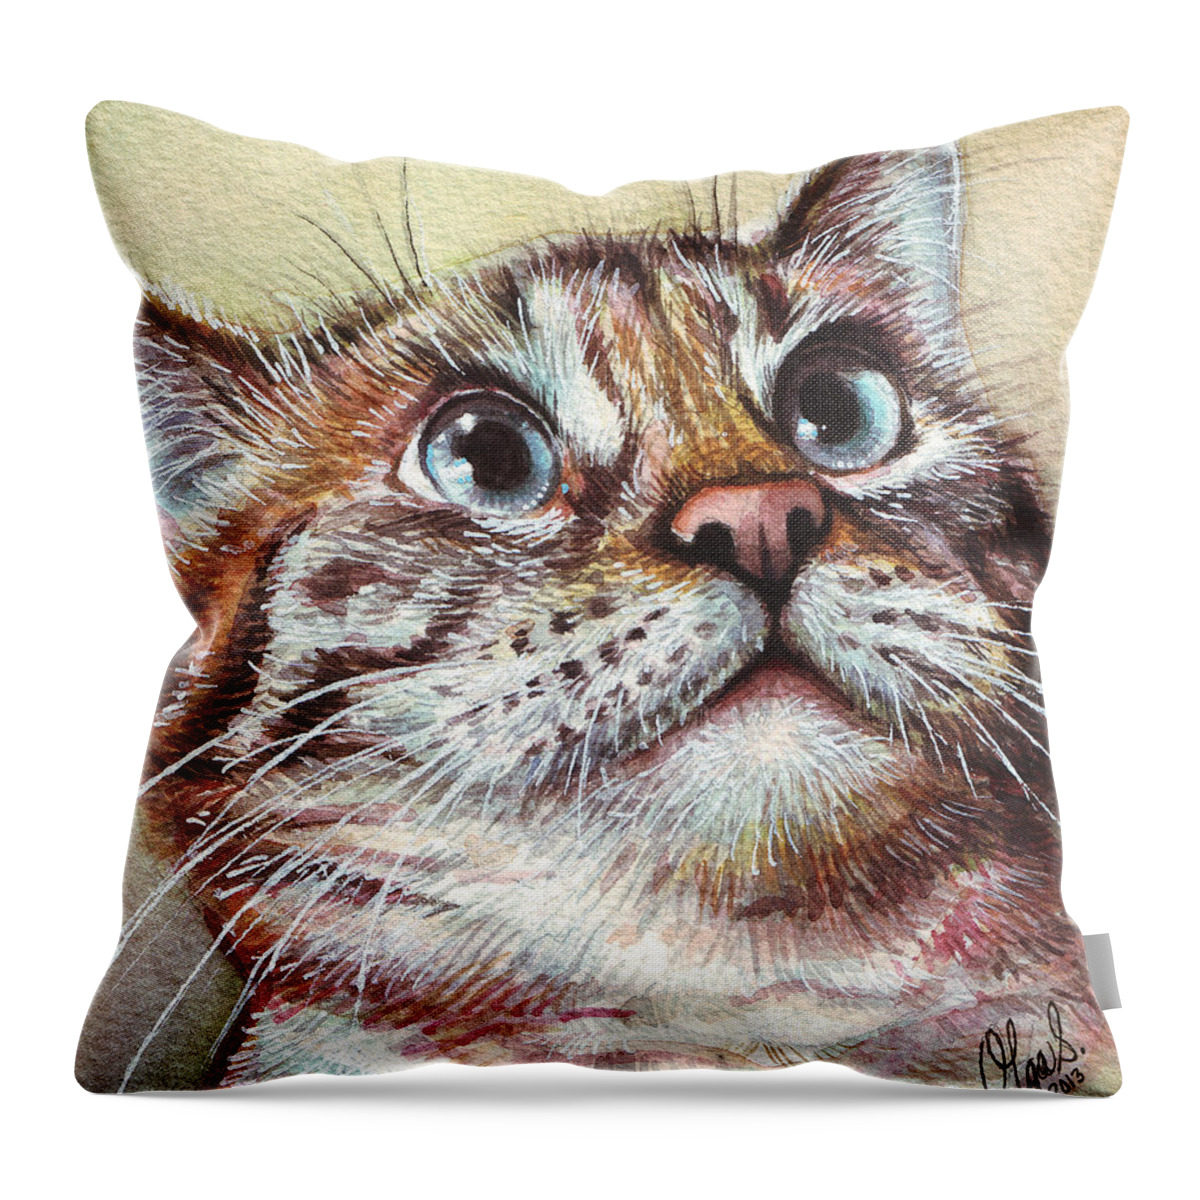 Kitty Throw Pillow featuring the painting Surprised Kitty by Olga Shvartsur